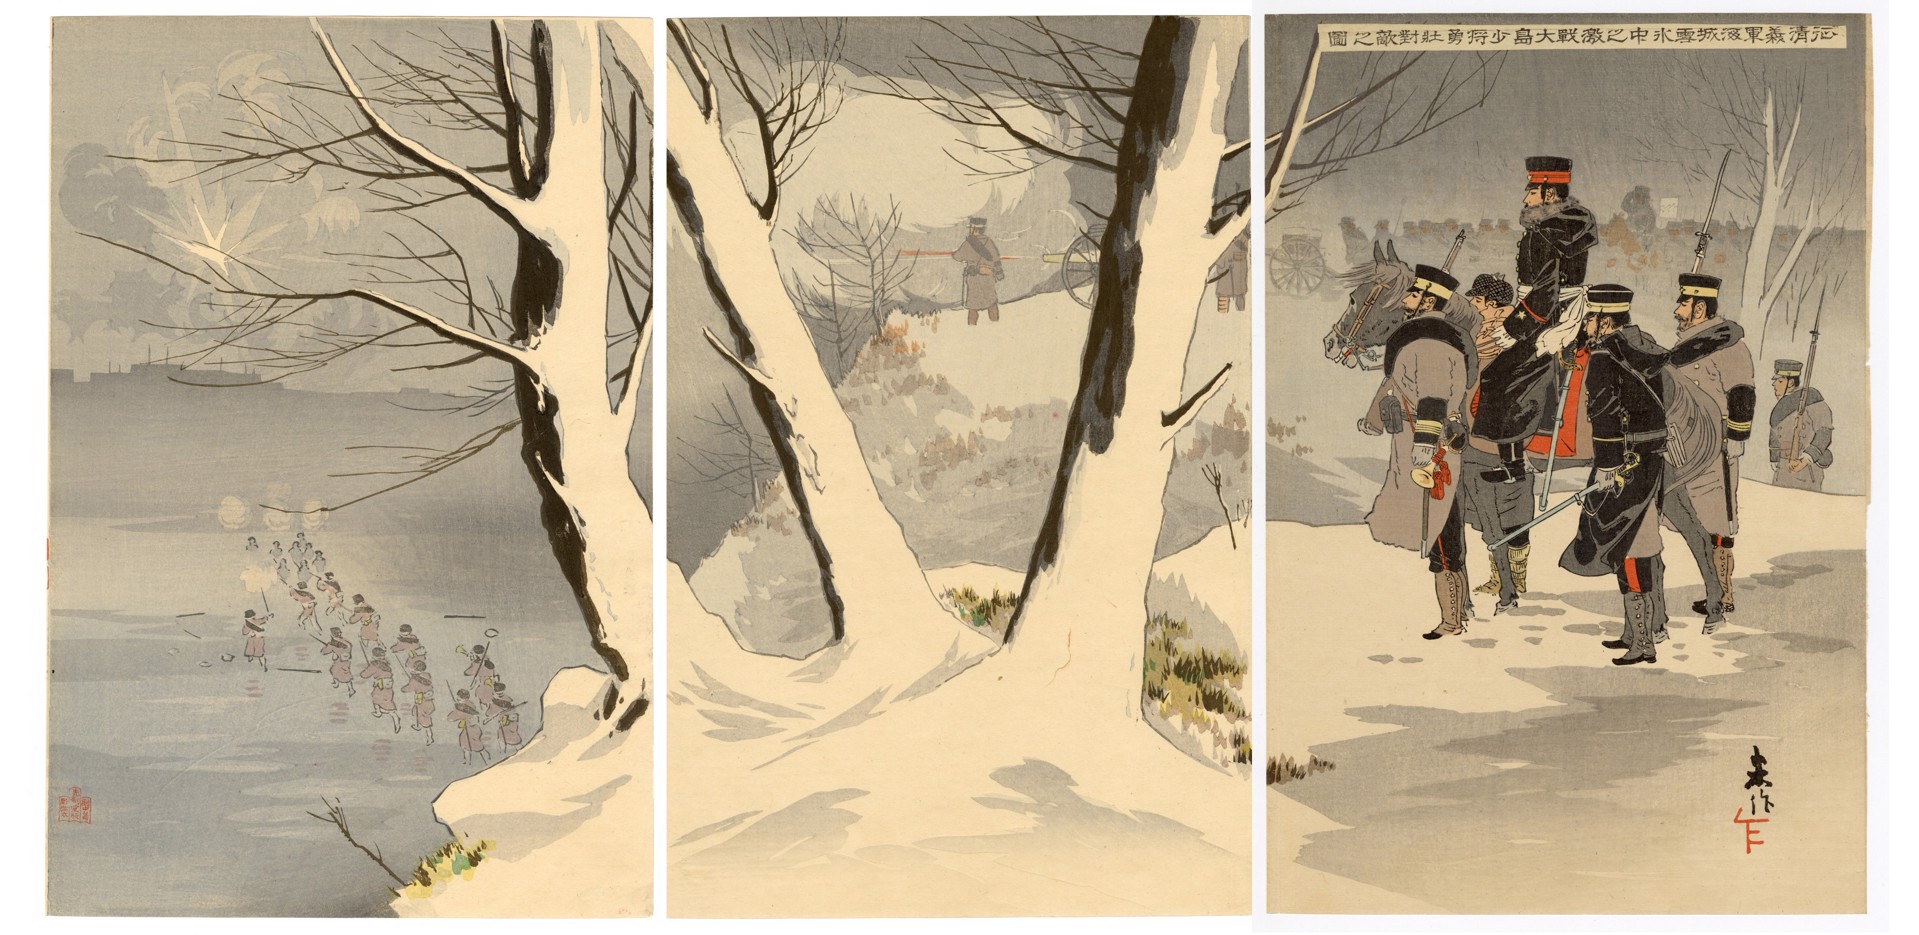 Invasion of China, in which our Troops Fought Fiercely in Ice and Snow at Haicheng and Major General Oshima Bravely Faced the Enemy Sino - Japanese war by Beisaku